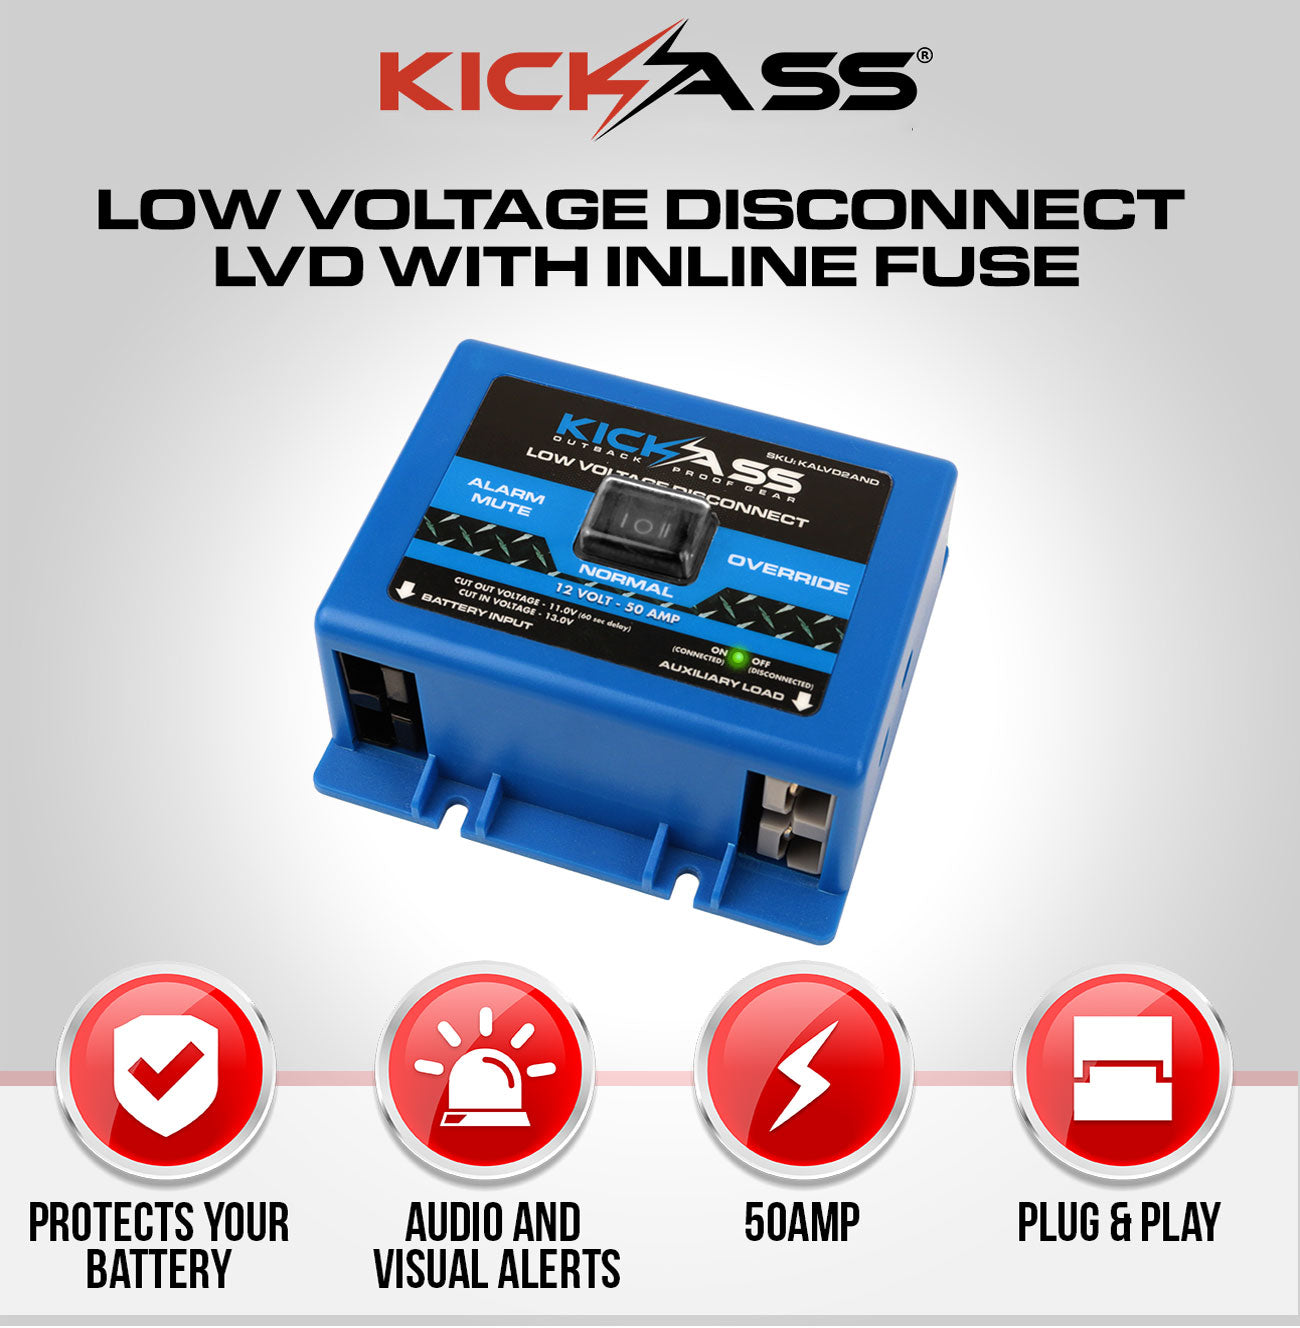 KickAss Low Voltage Disconnect LVD with Inline Fuse Success